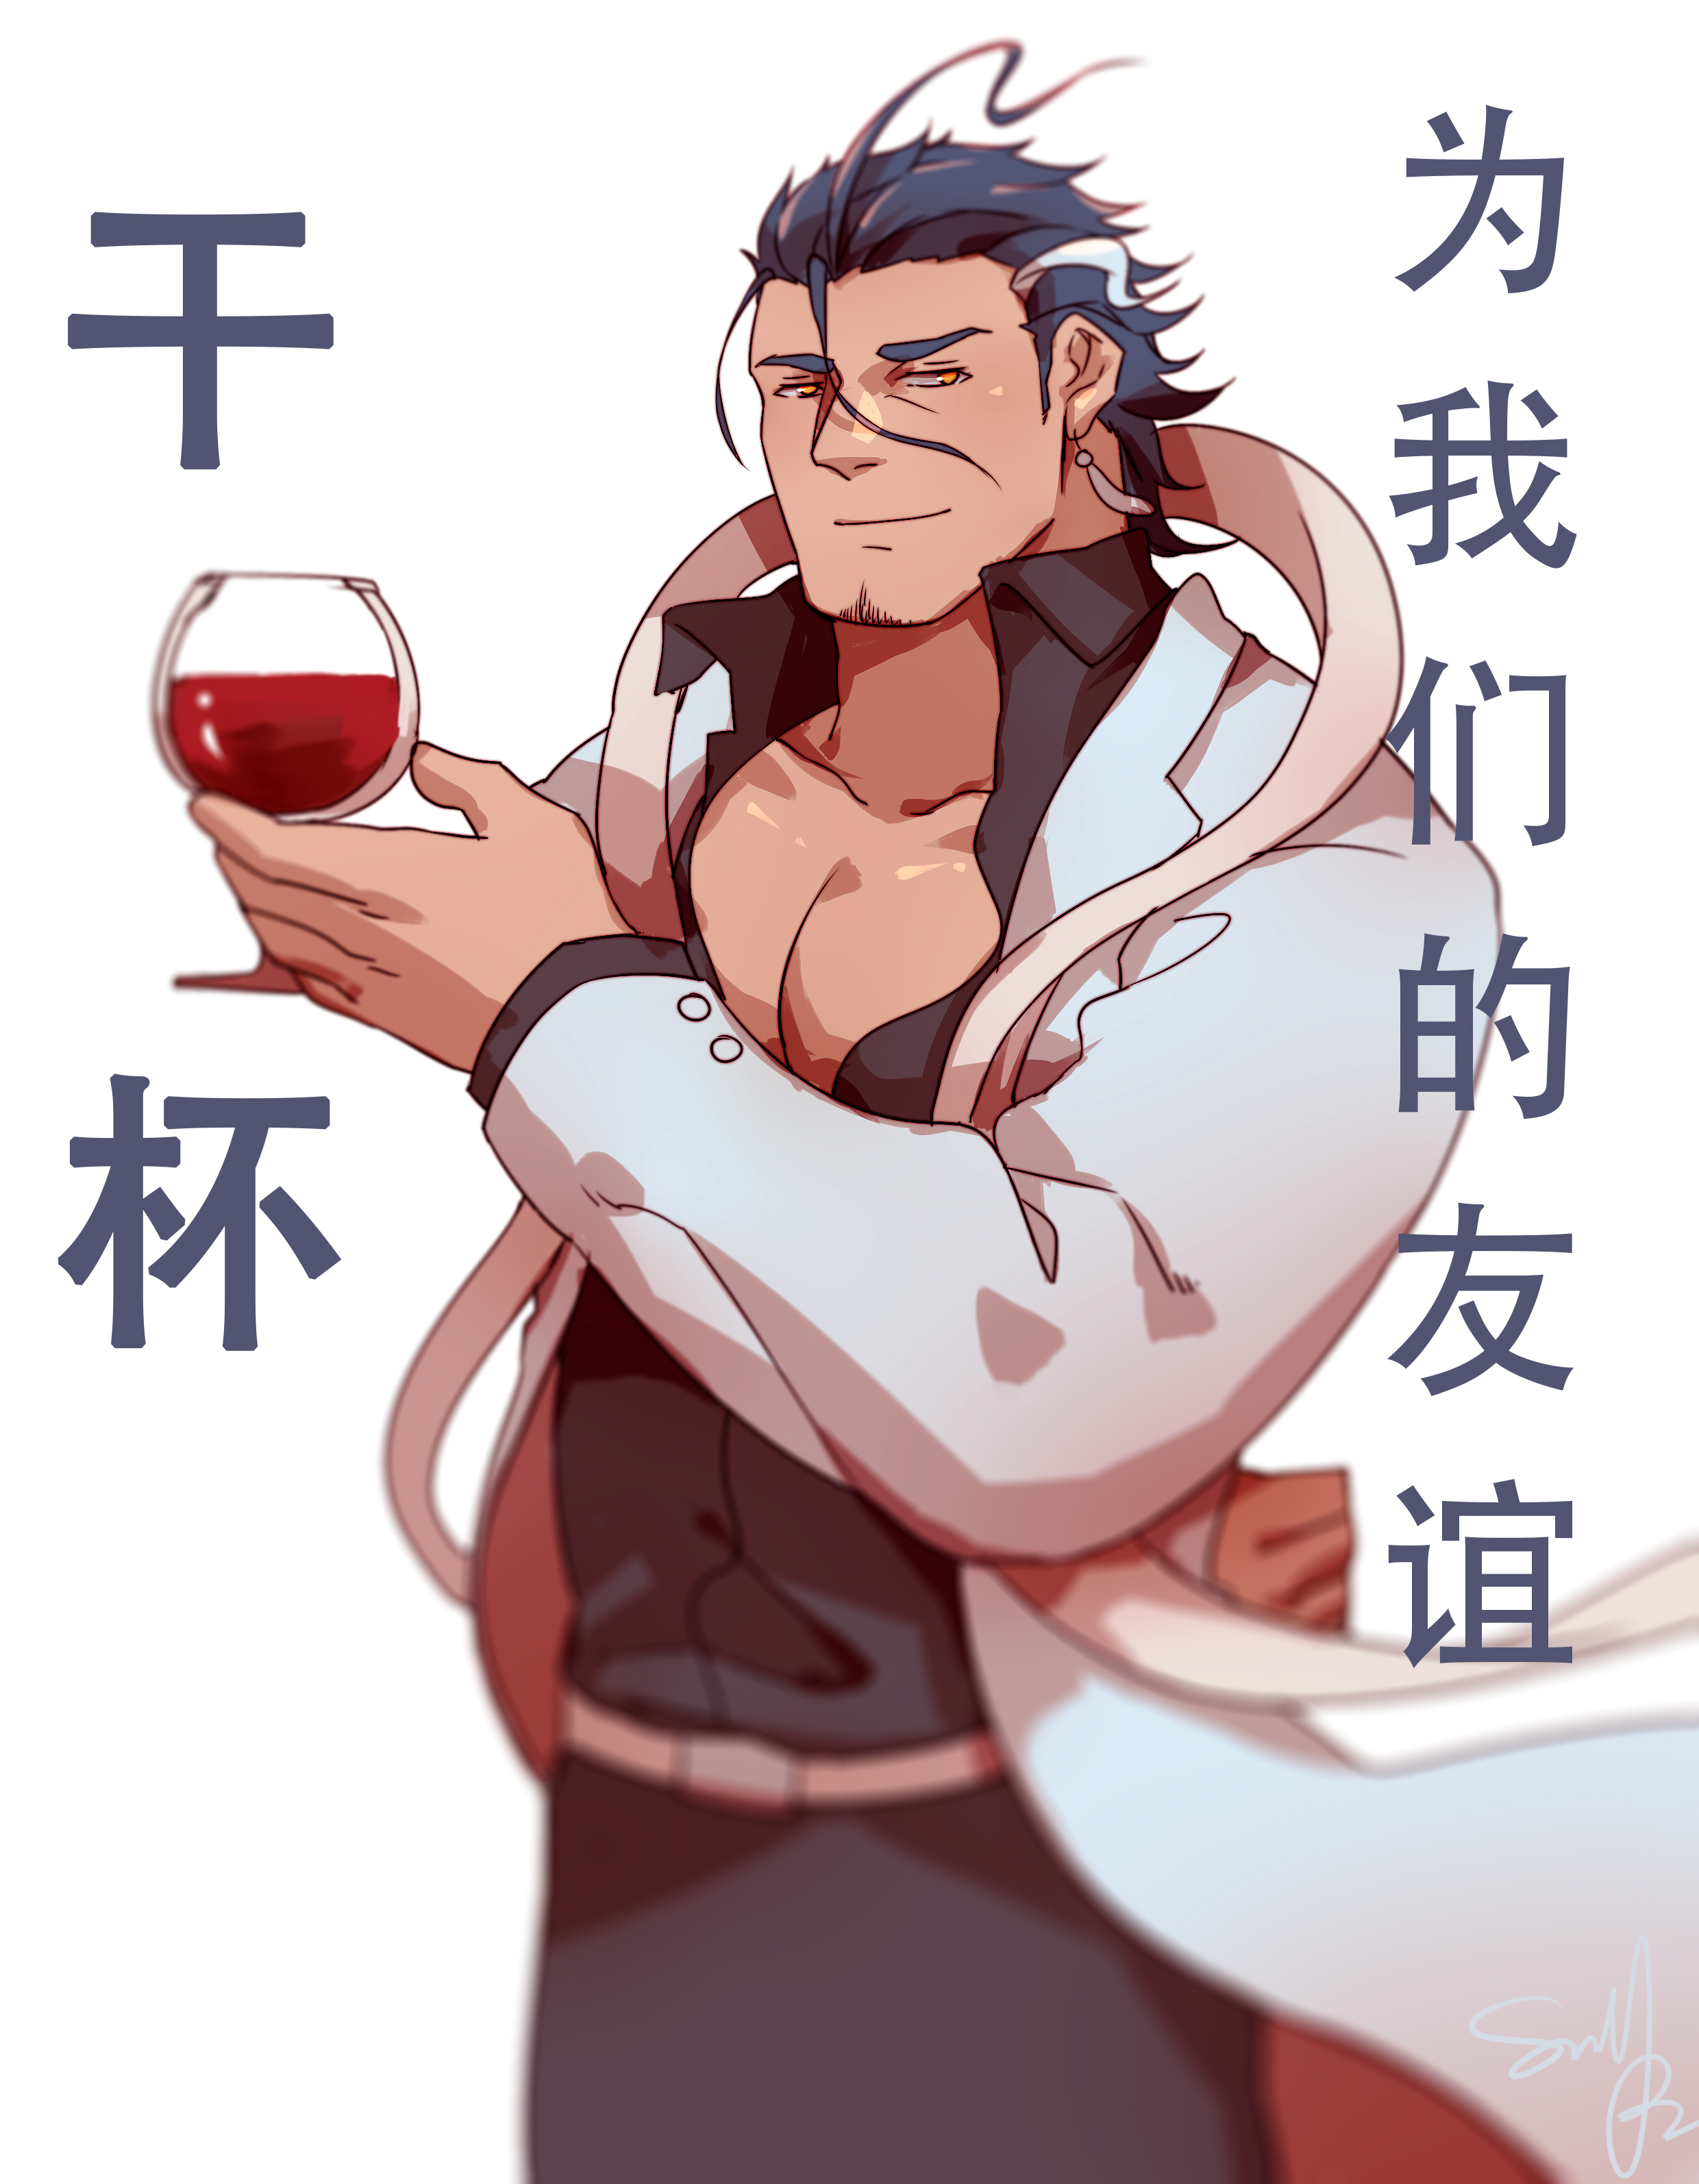 Cheers for our friendship插画图片壁纸